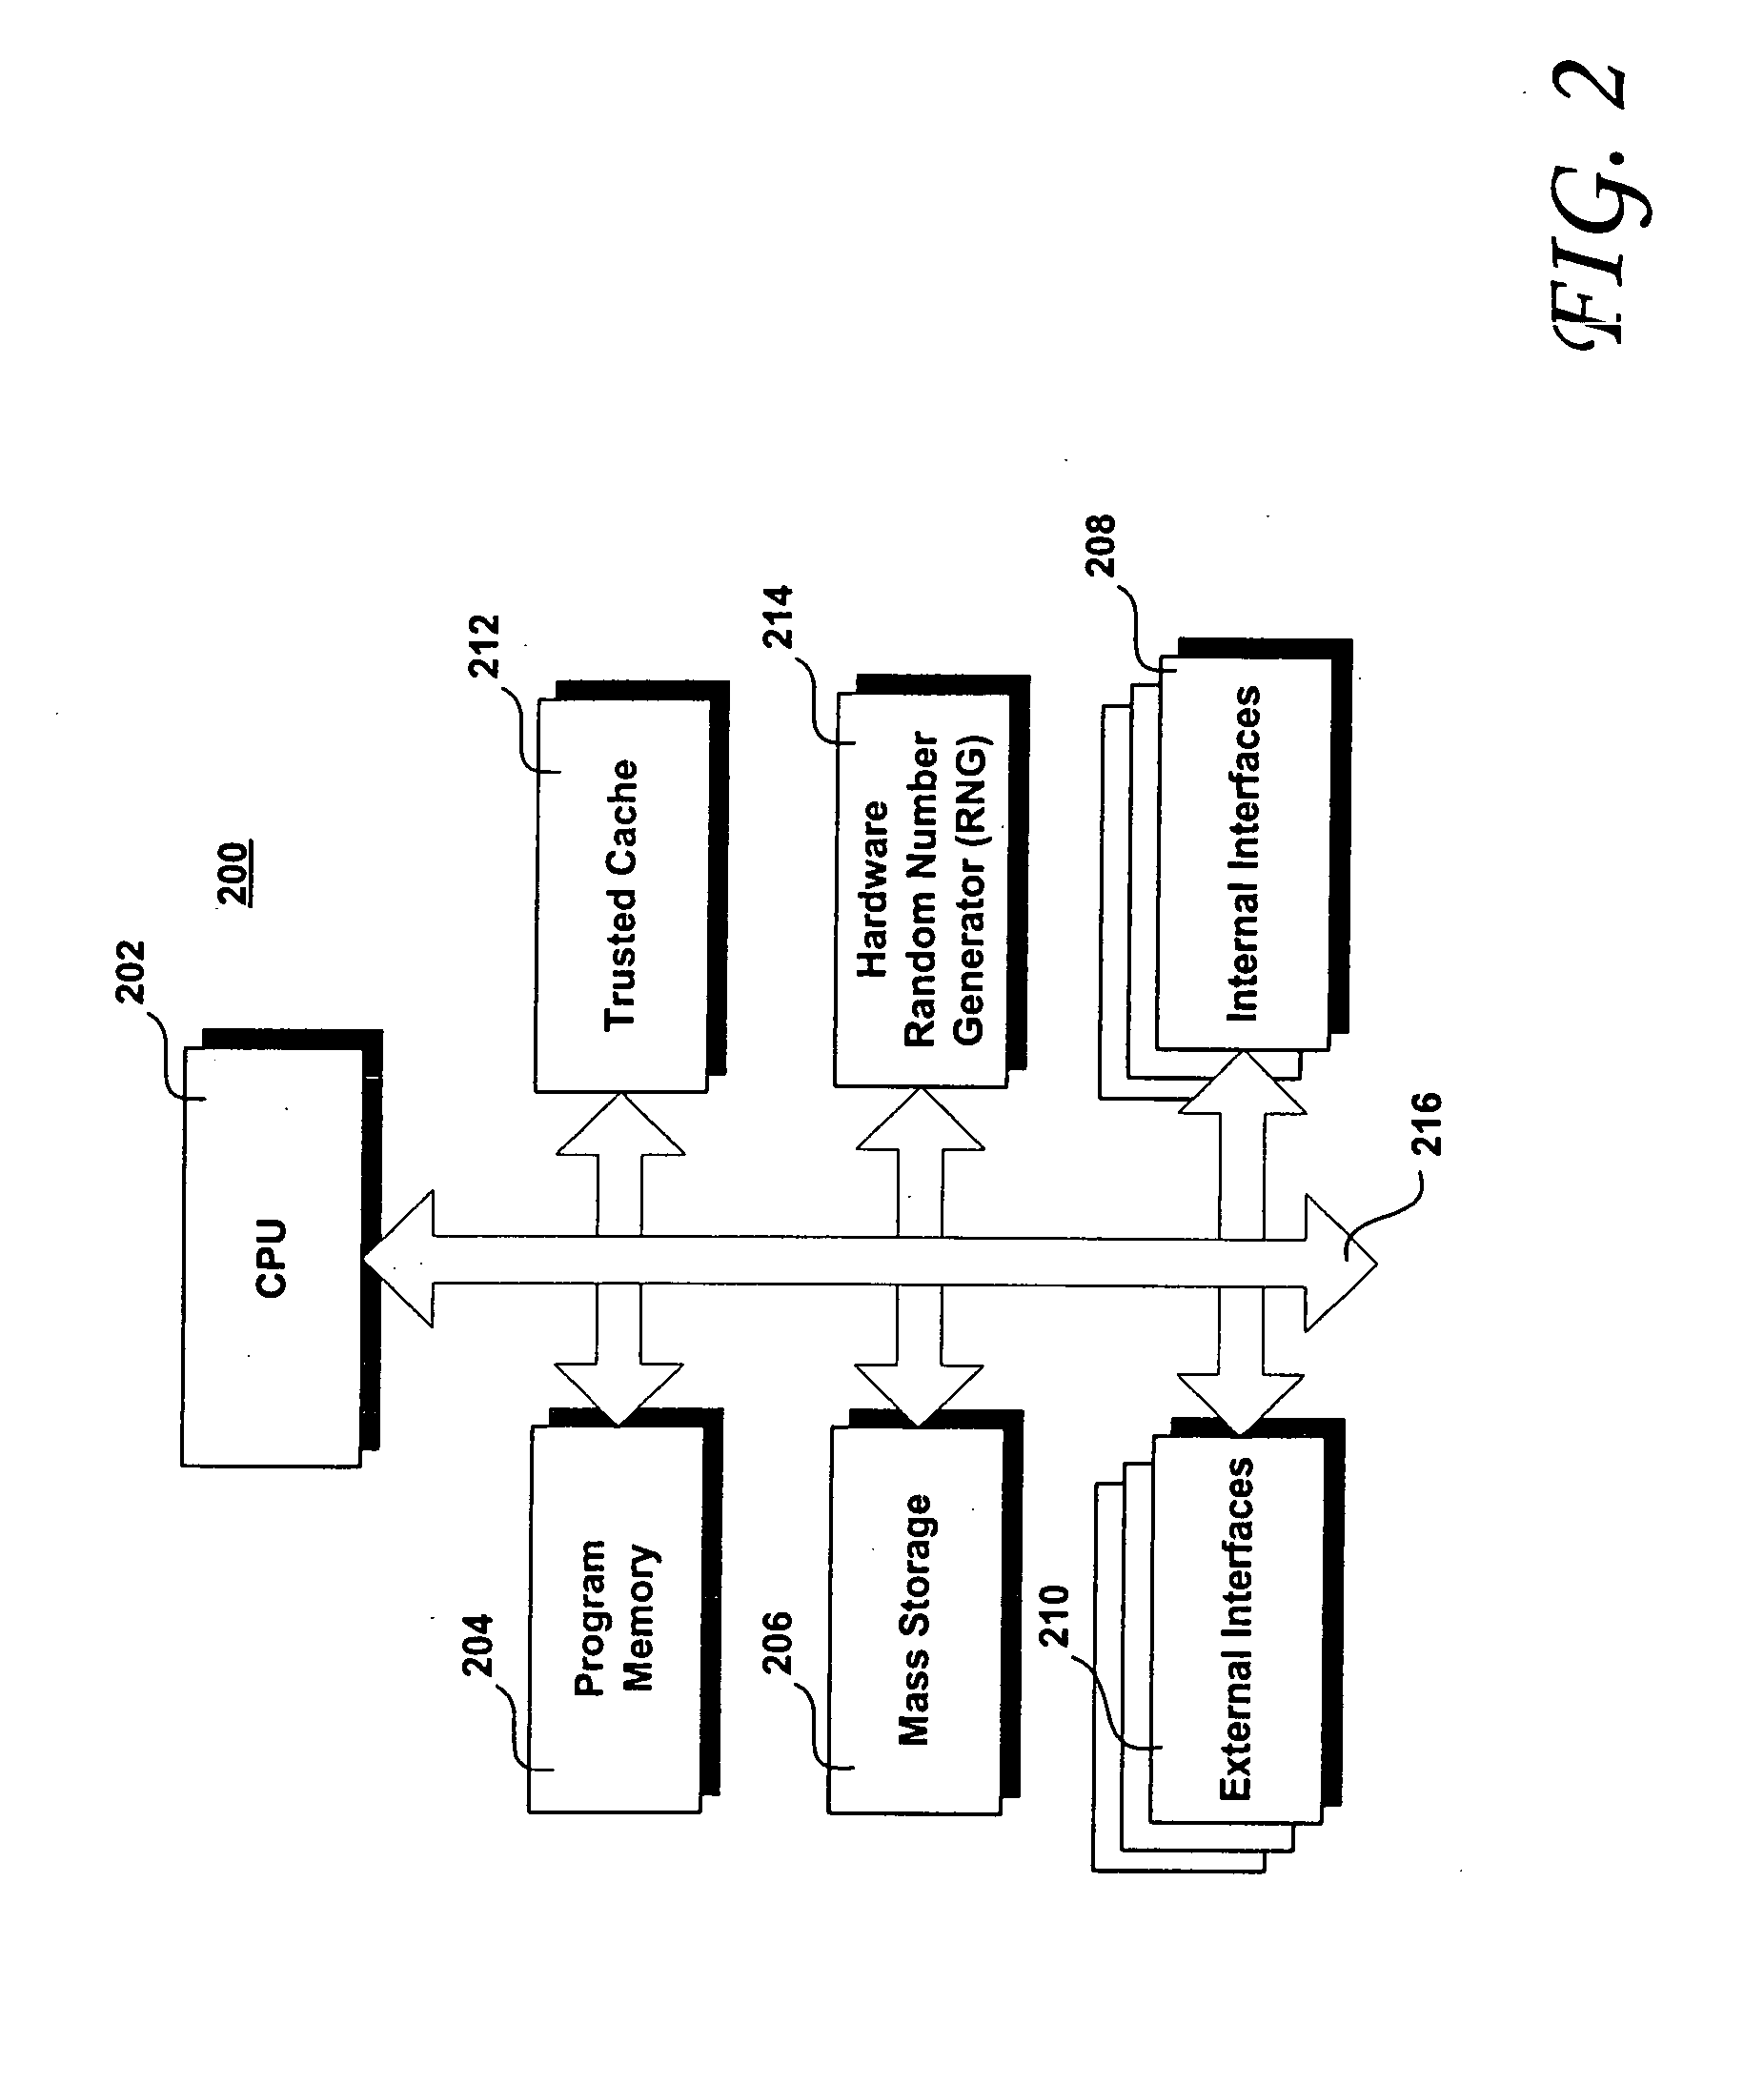 Trusted watchdog method and apparatus for securing program execution